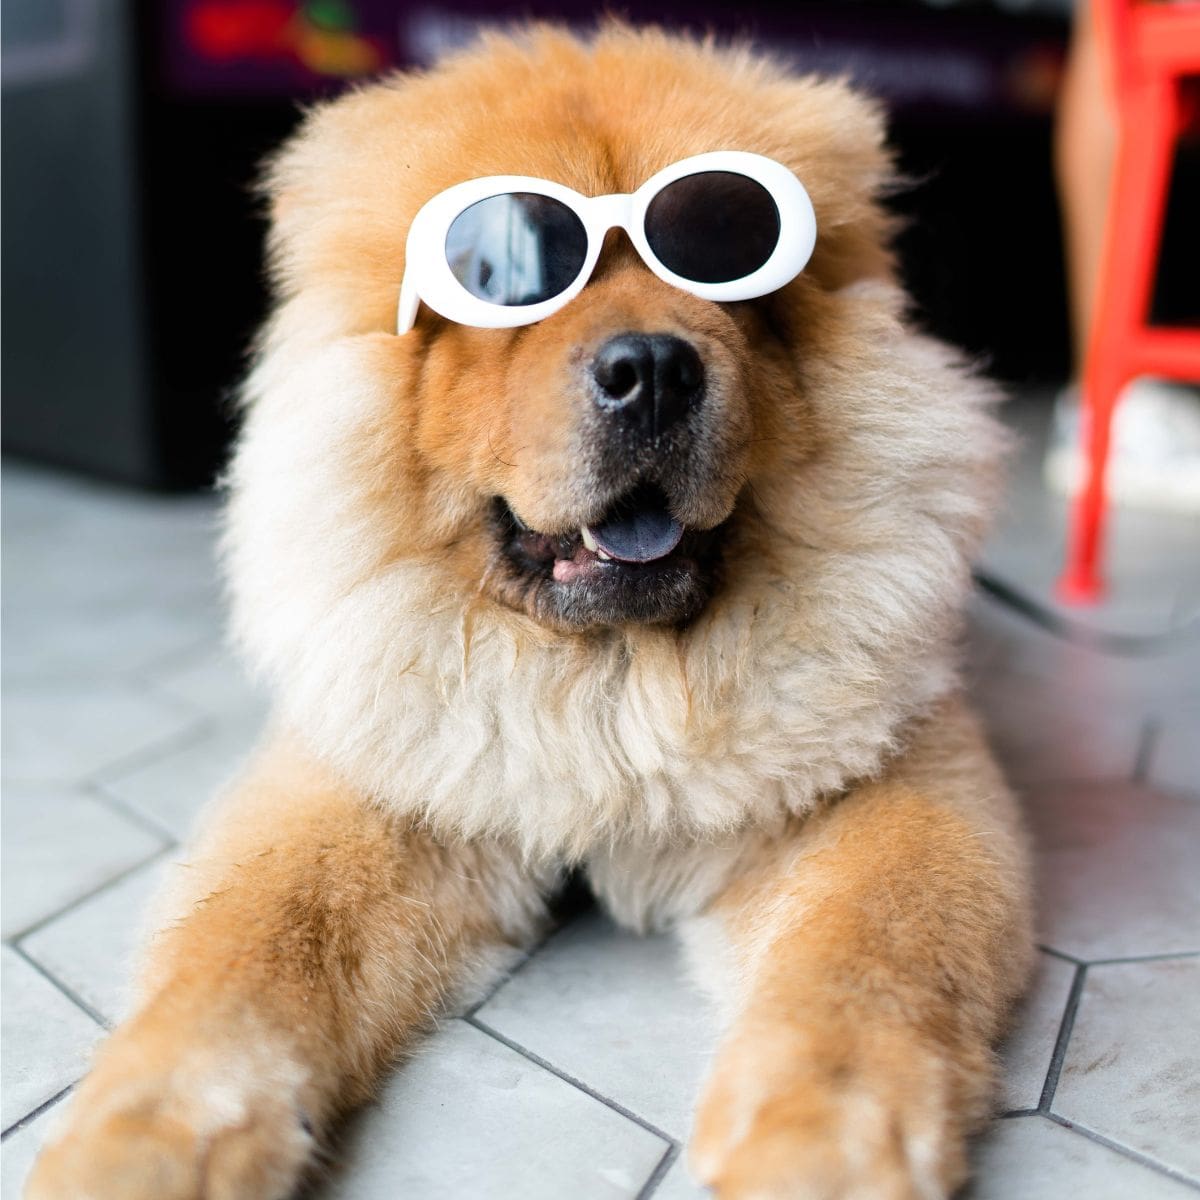 Dog with sunglasses on sitting on the floor